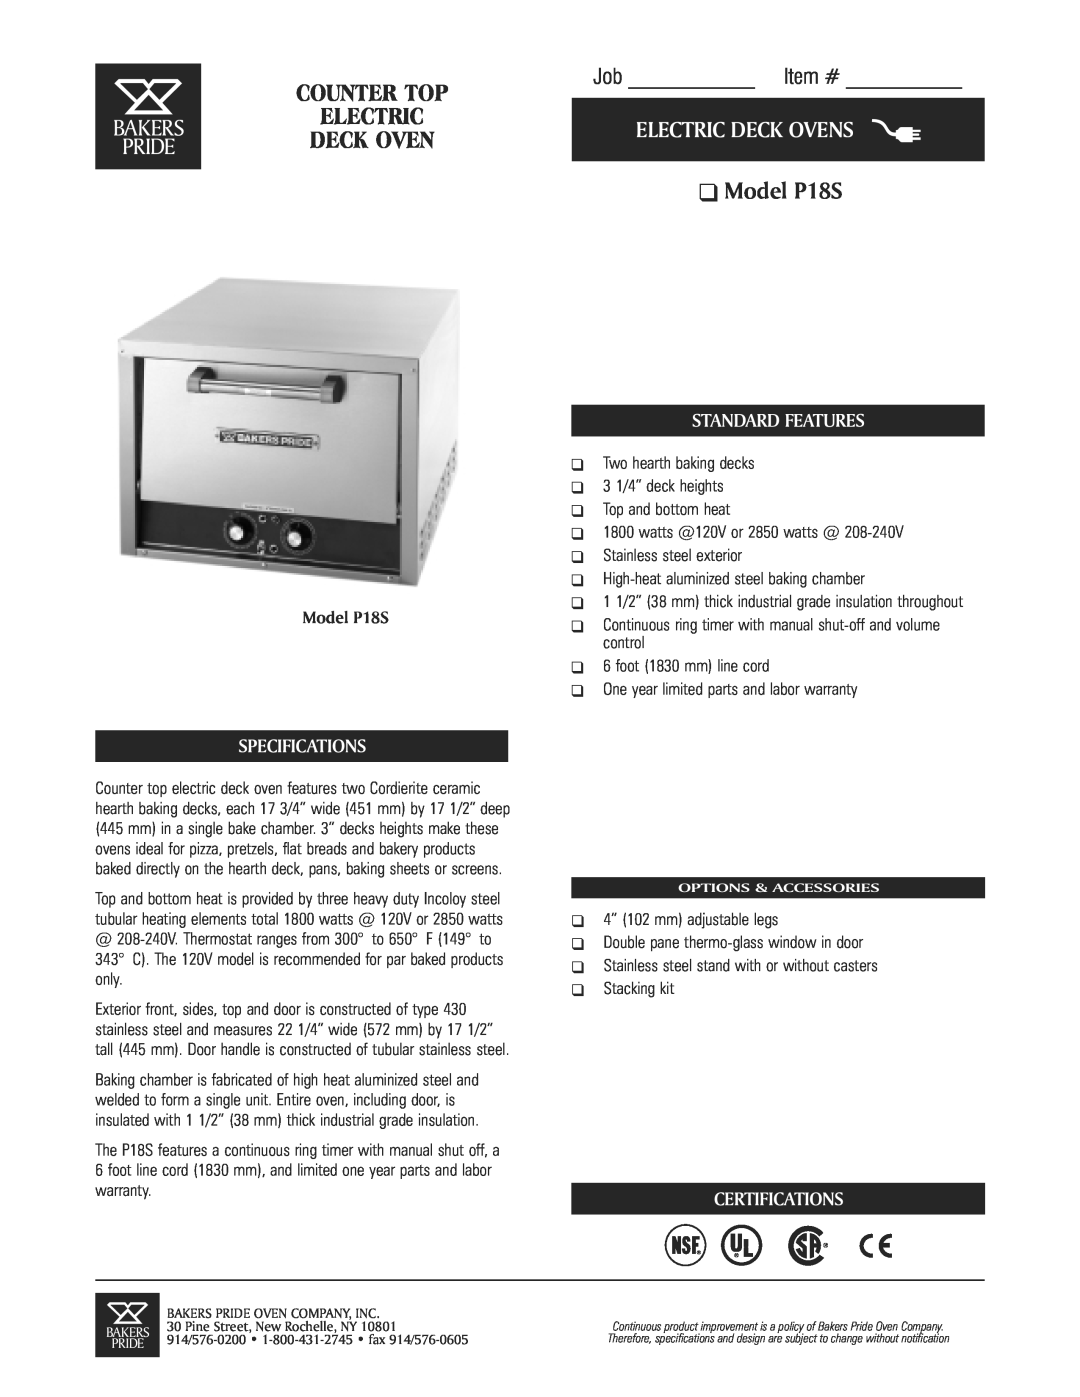 Bakers Pride Oven P185 specifications Model P18S, Counter Top, Electric Deck Ovens, Job Item #, Standard Features 